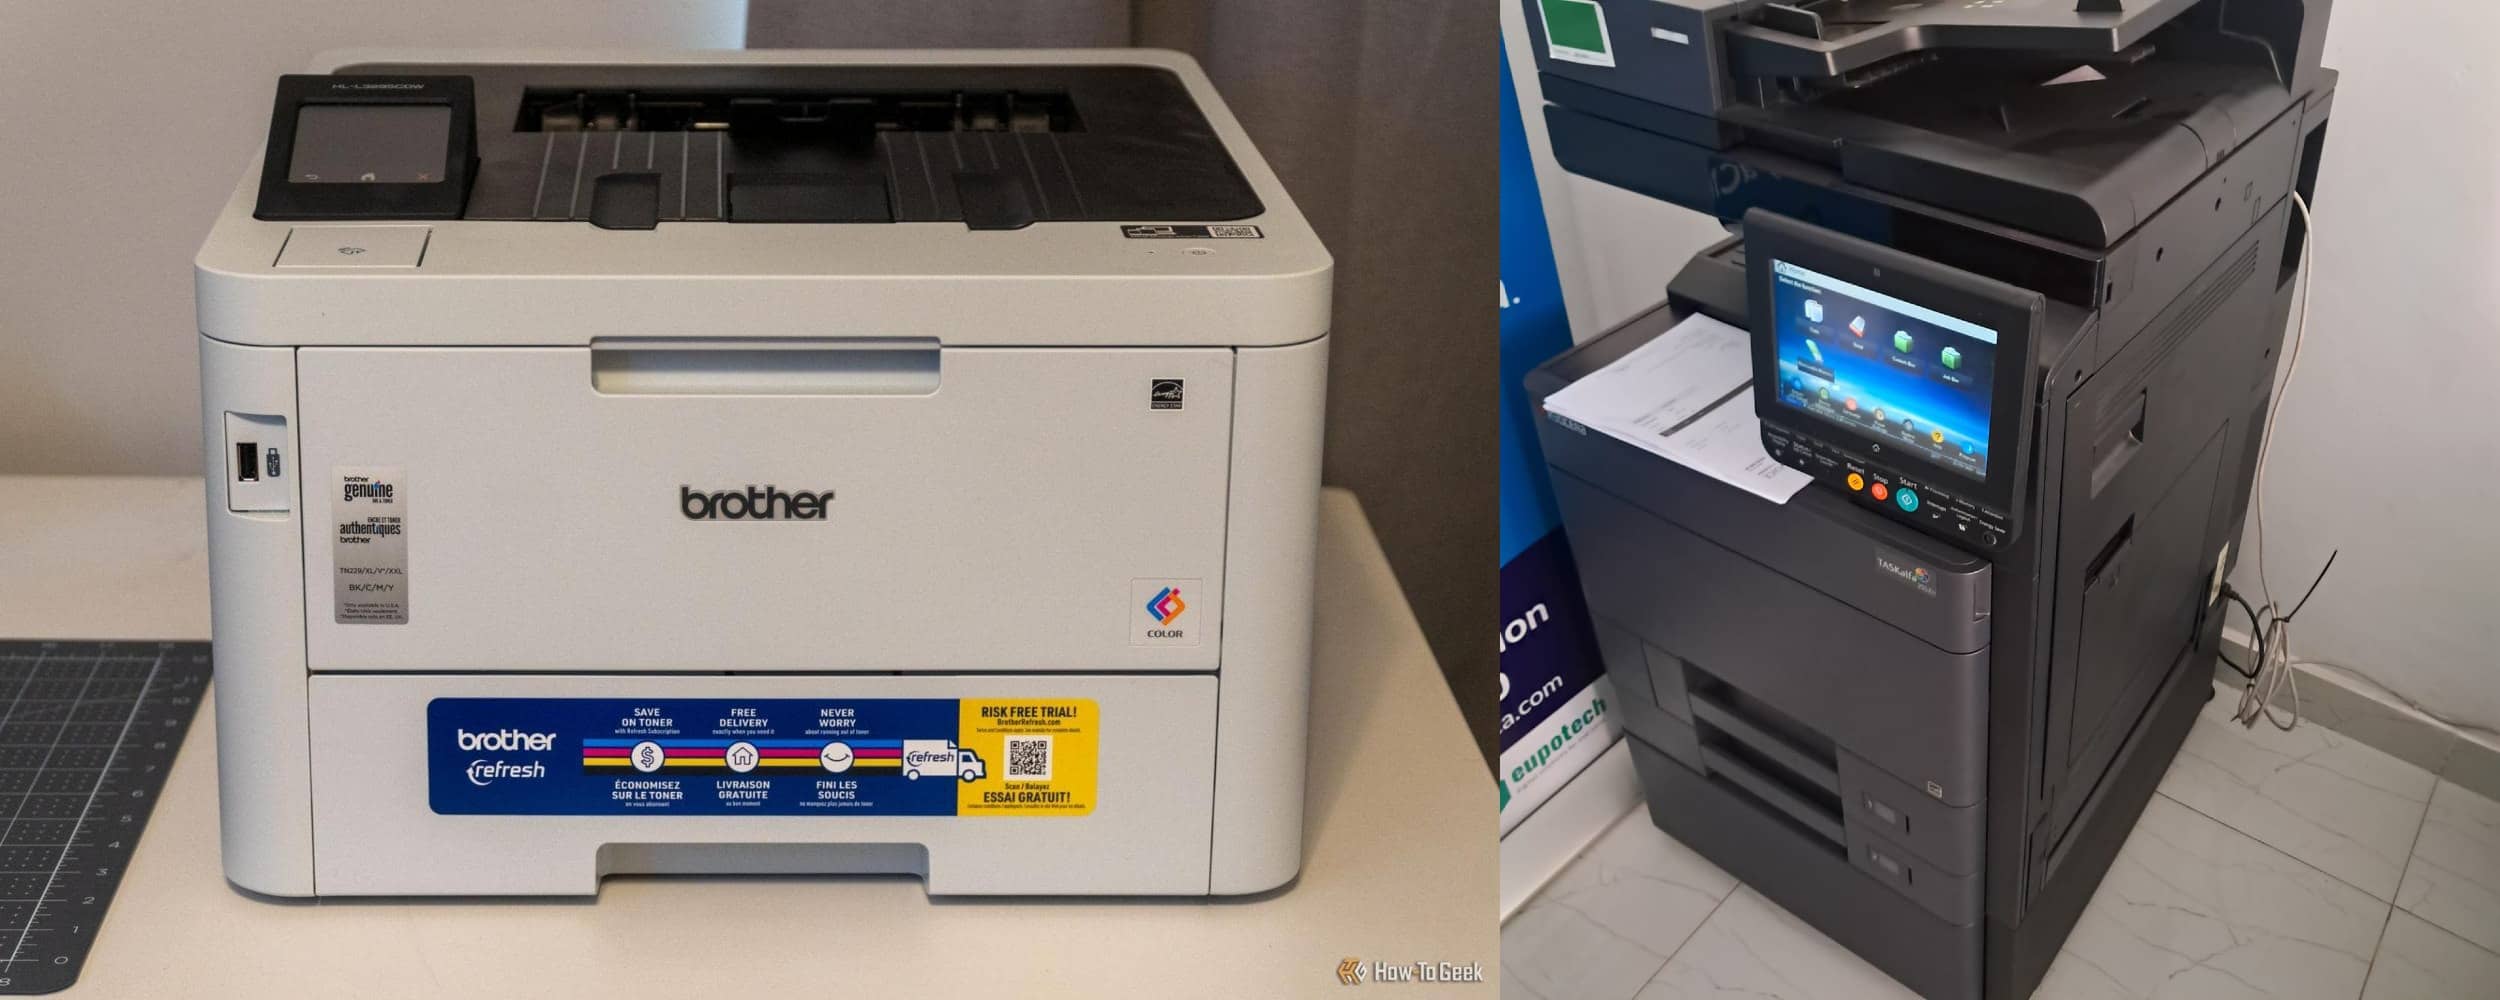 Laser Printers for home use - buyer guide